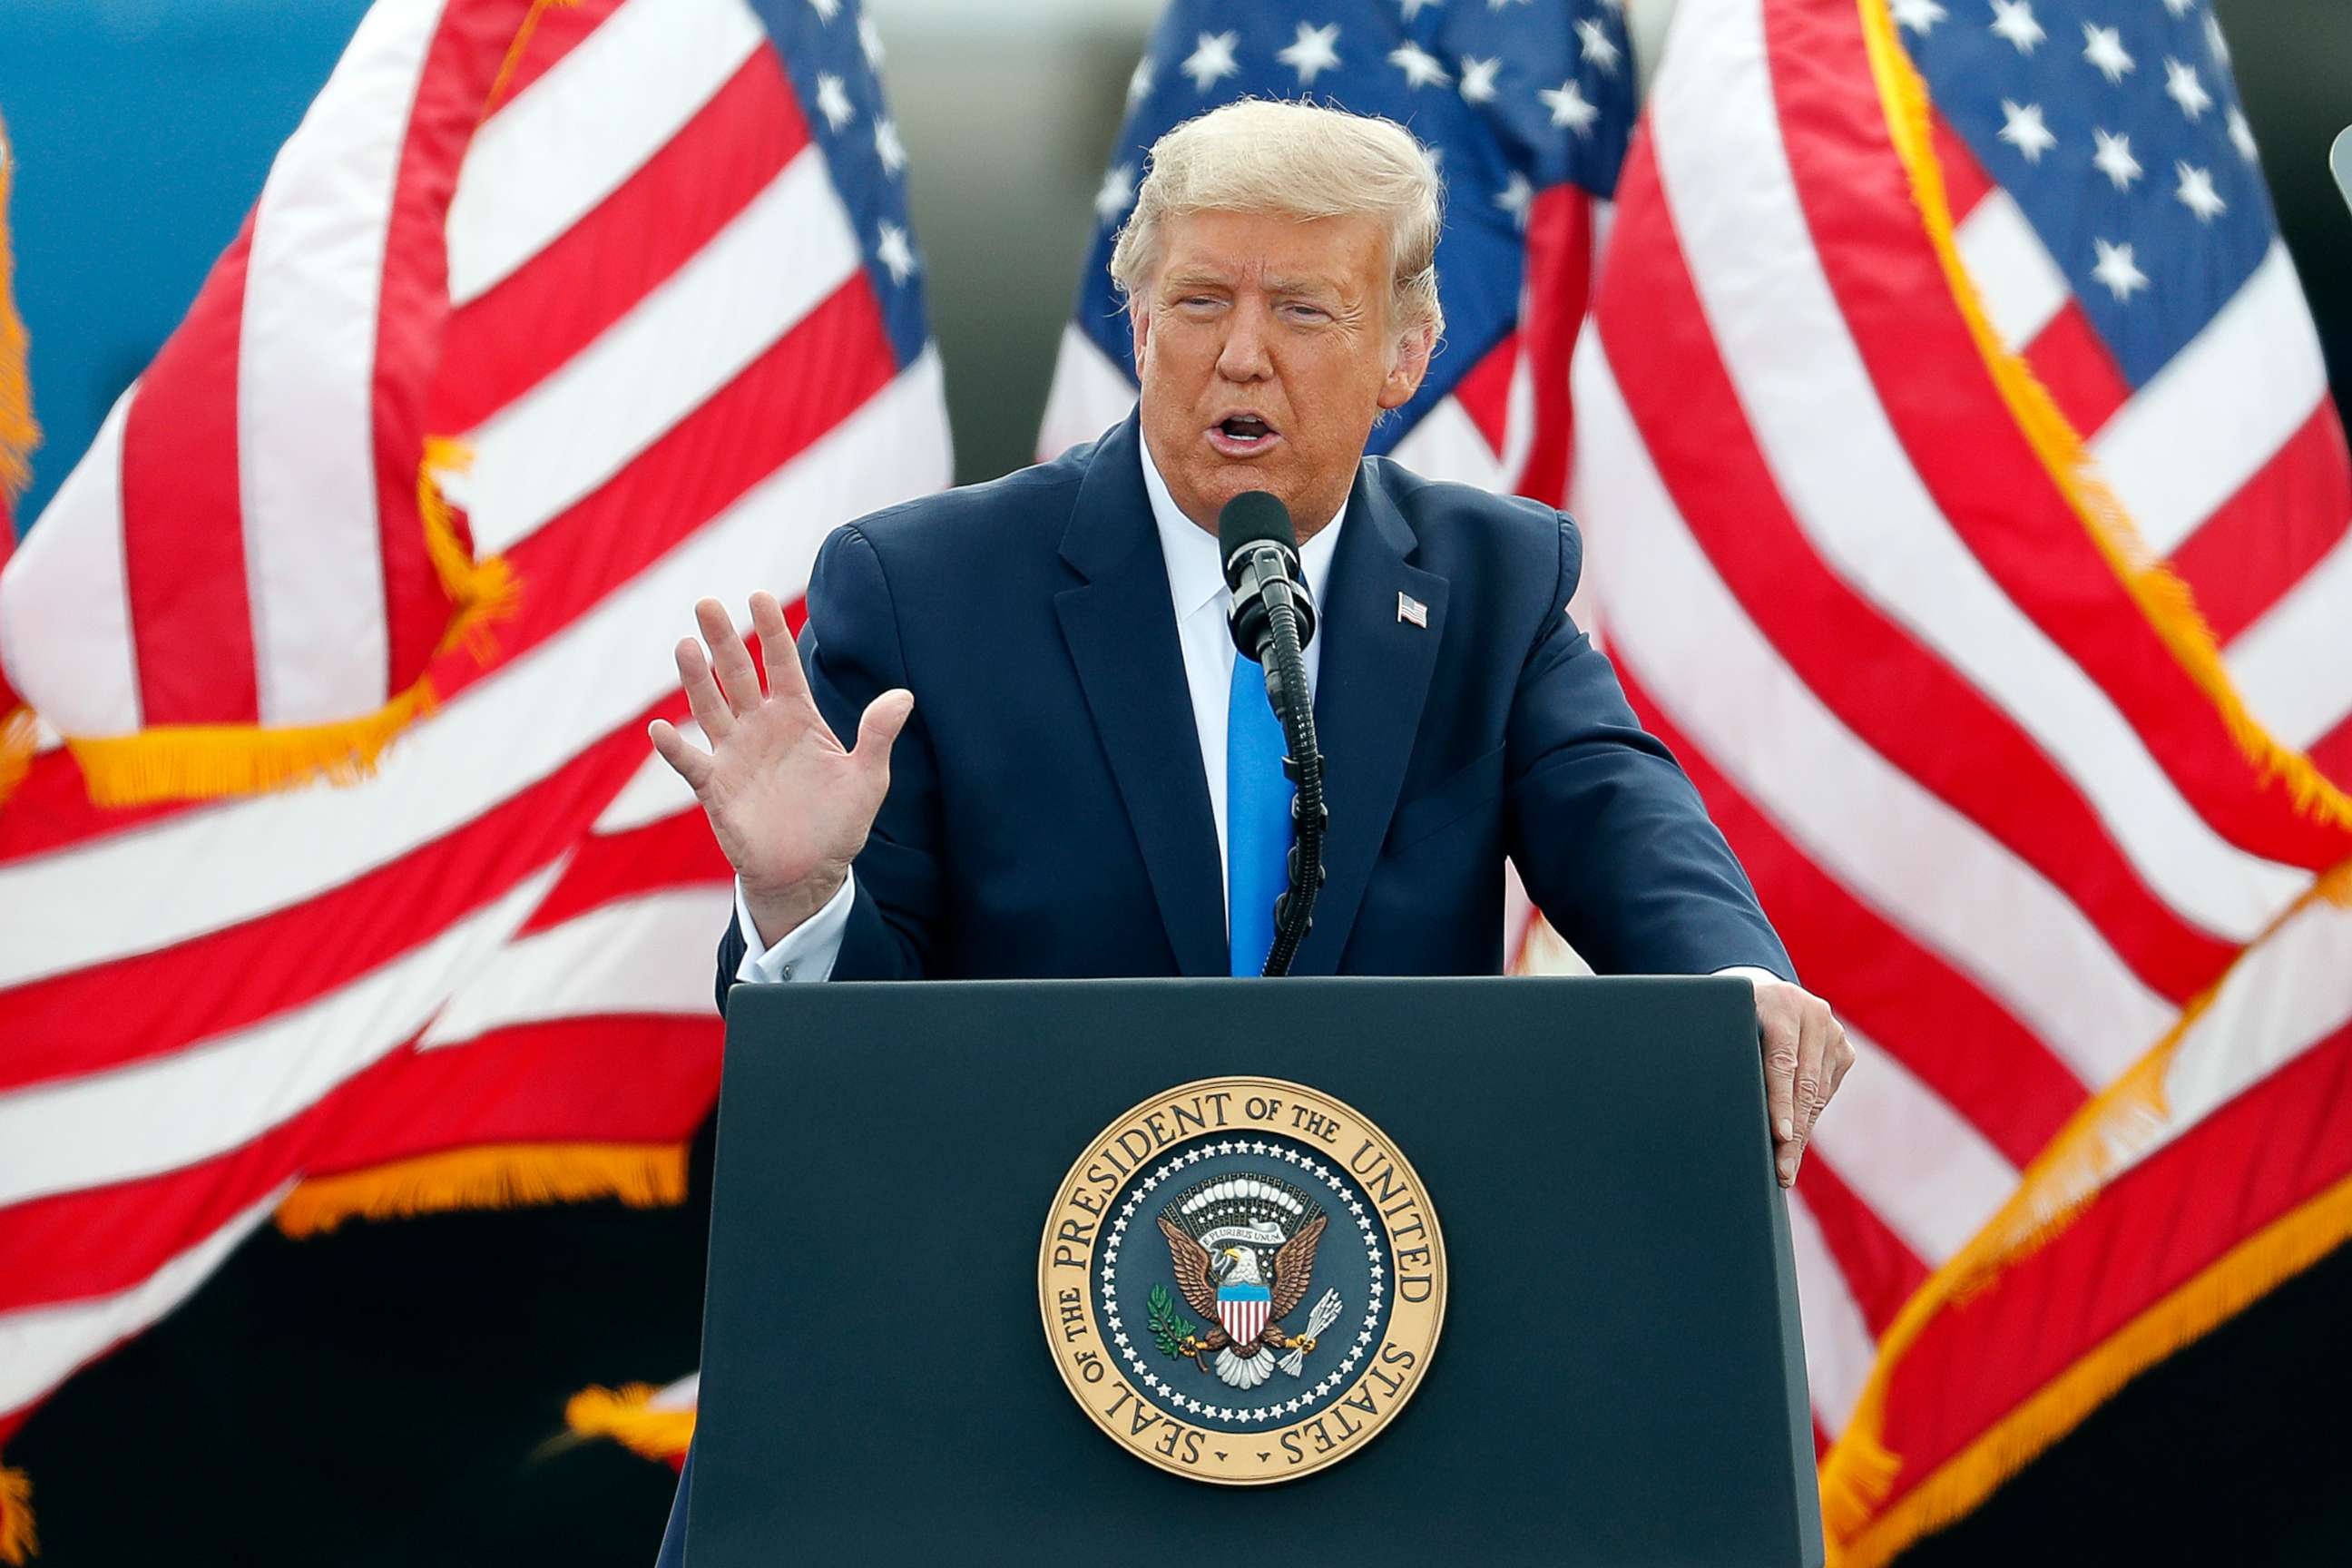 PHOTO: President Donald Trump speaks during a campaign rally in Greenville, N.C., Oct. 15, 2020.